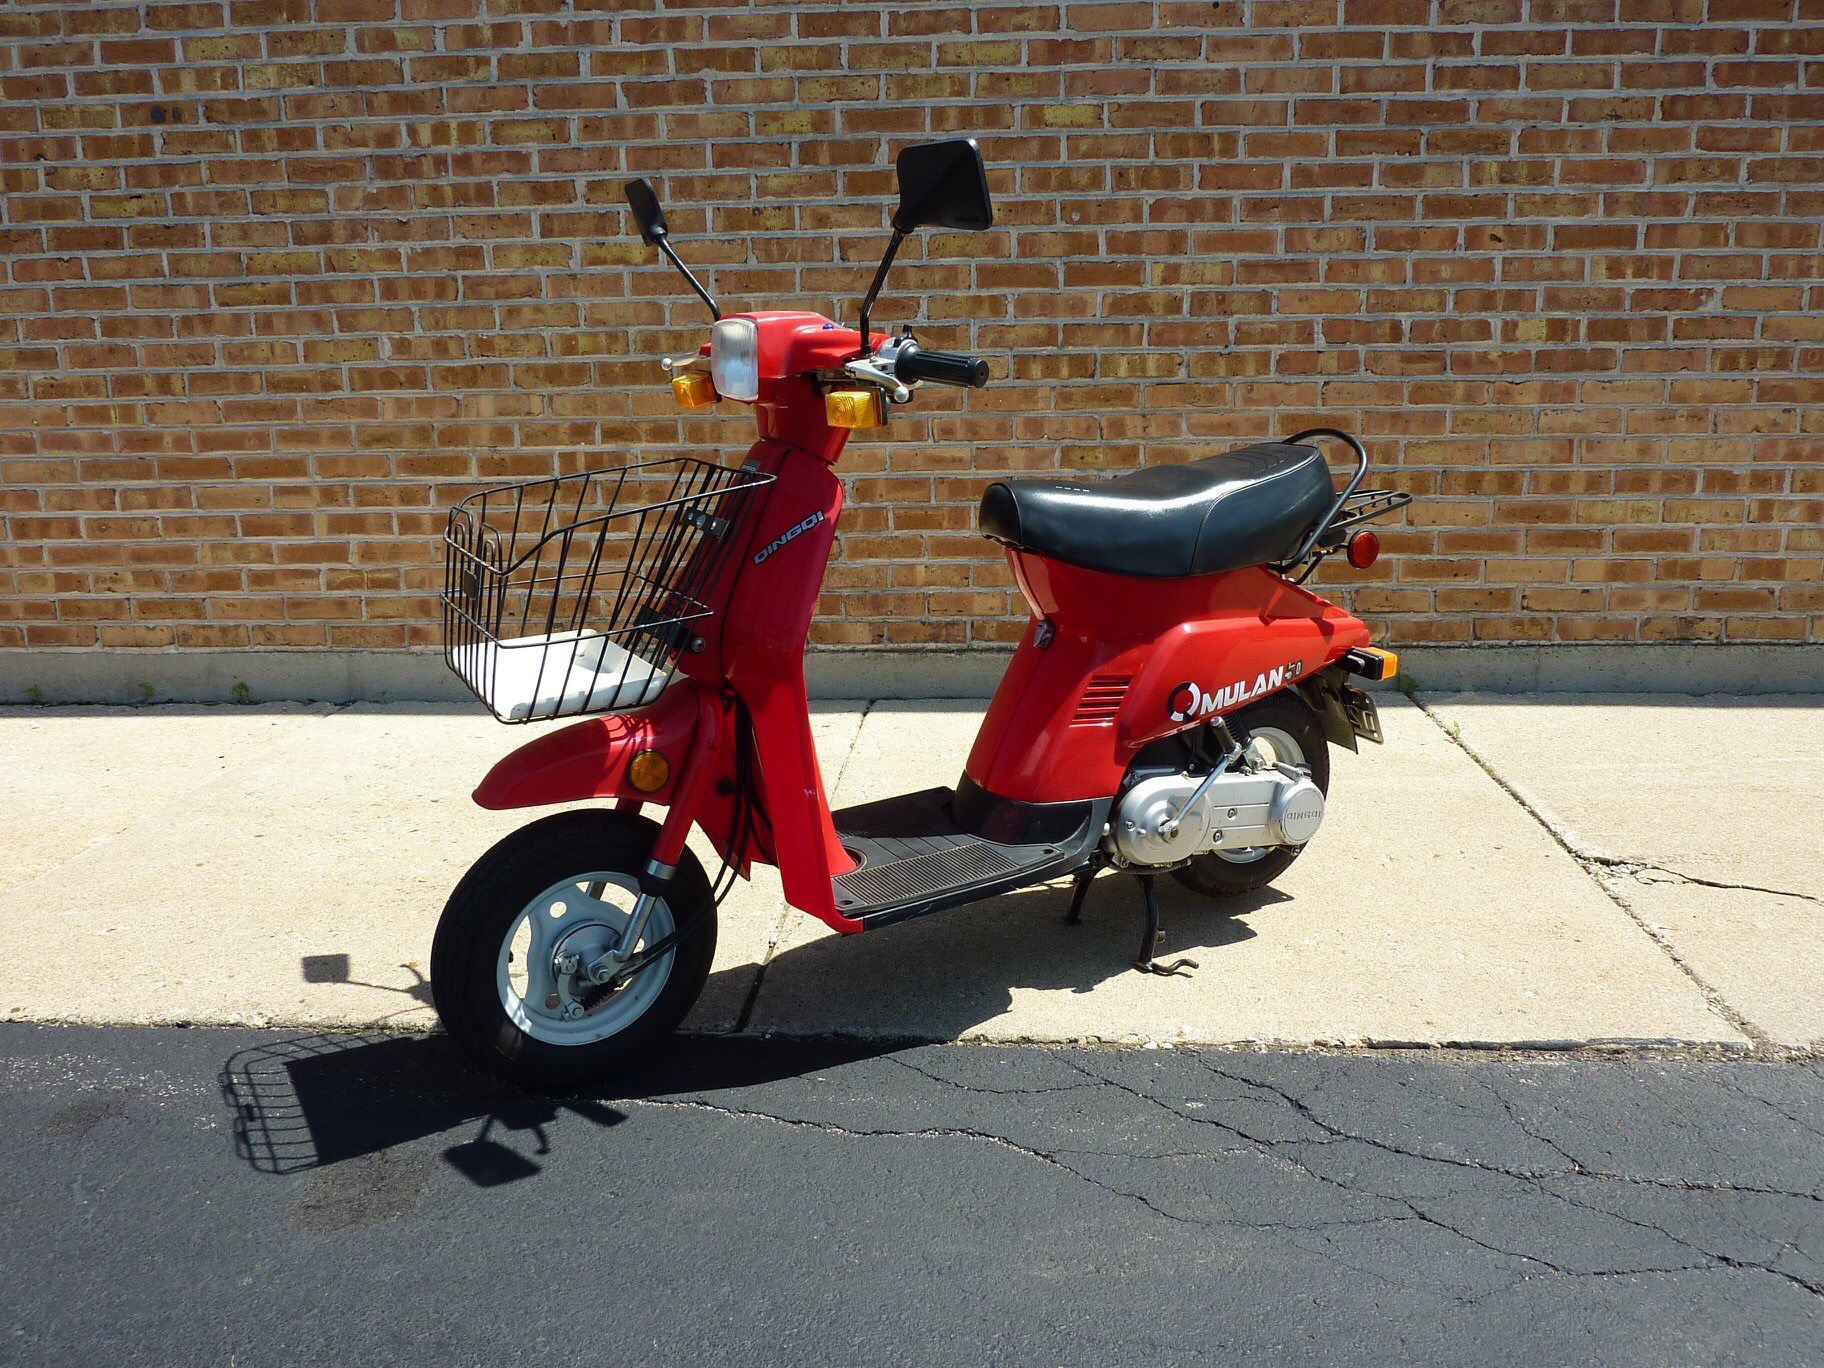 Qingqi Mulan 50, Street Legal Scooter. for Sale in Stream, IL - OfferUp